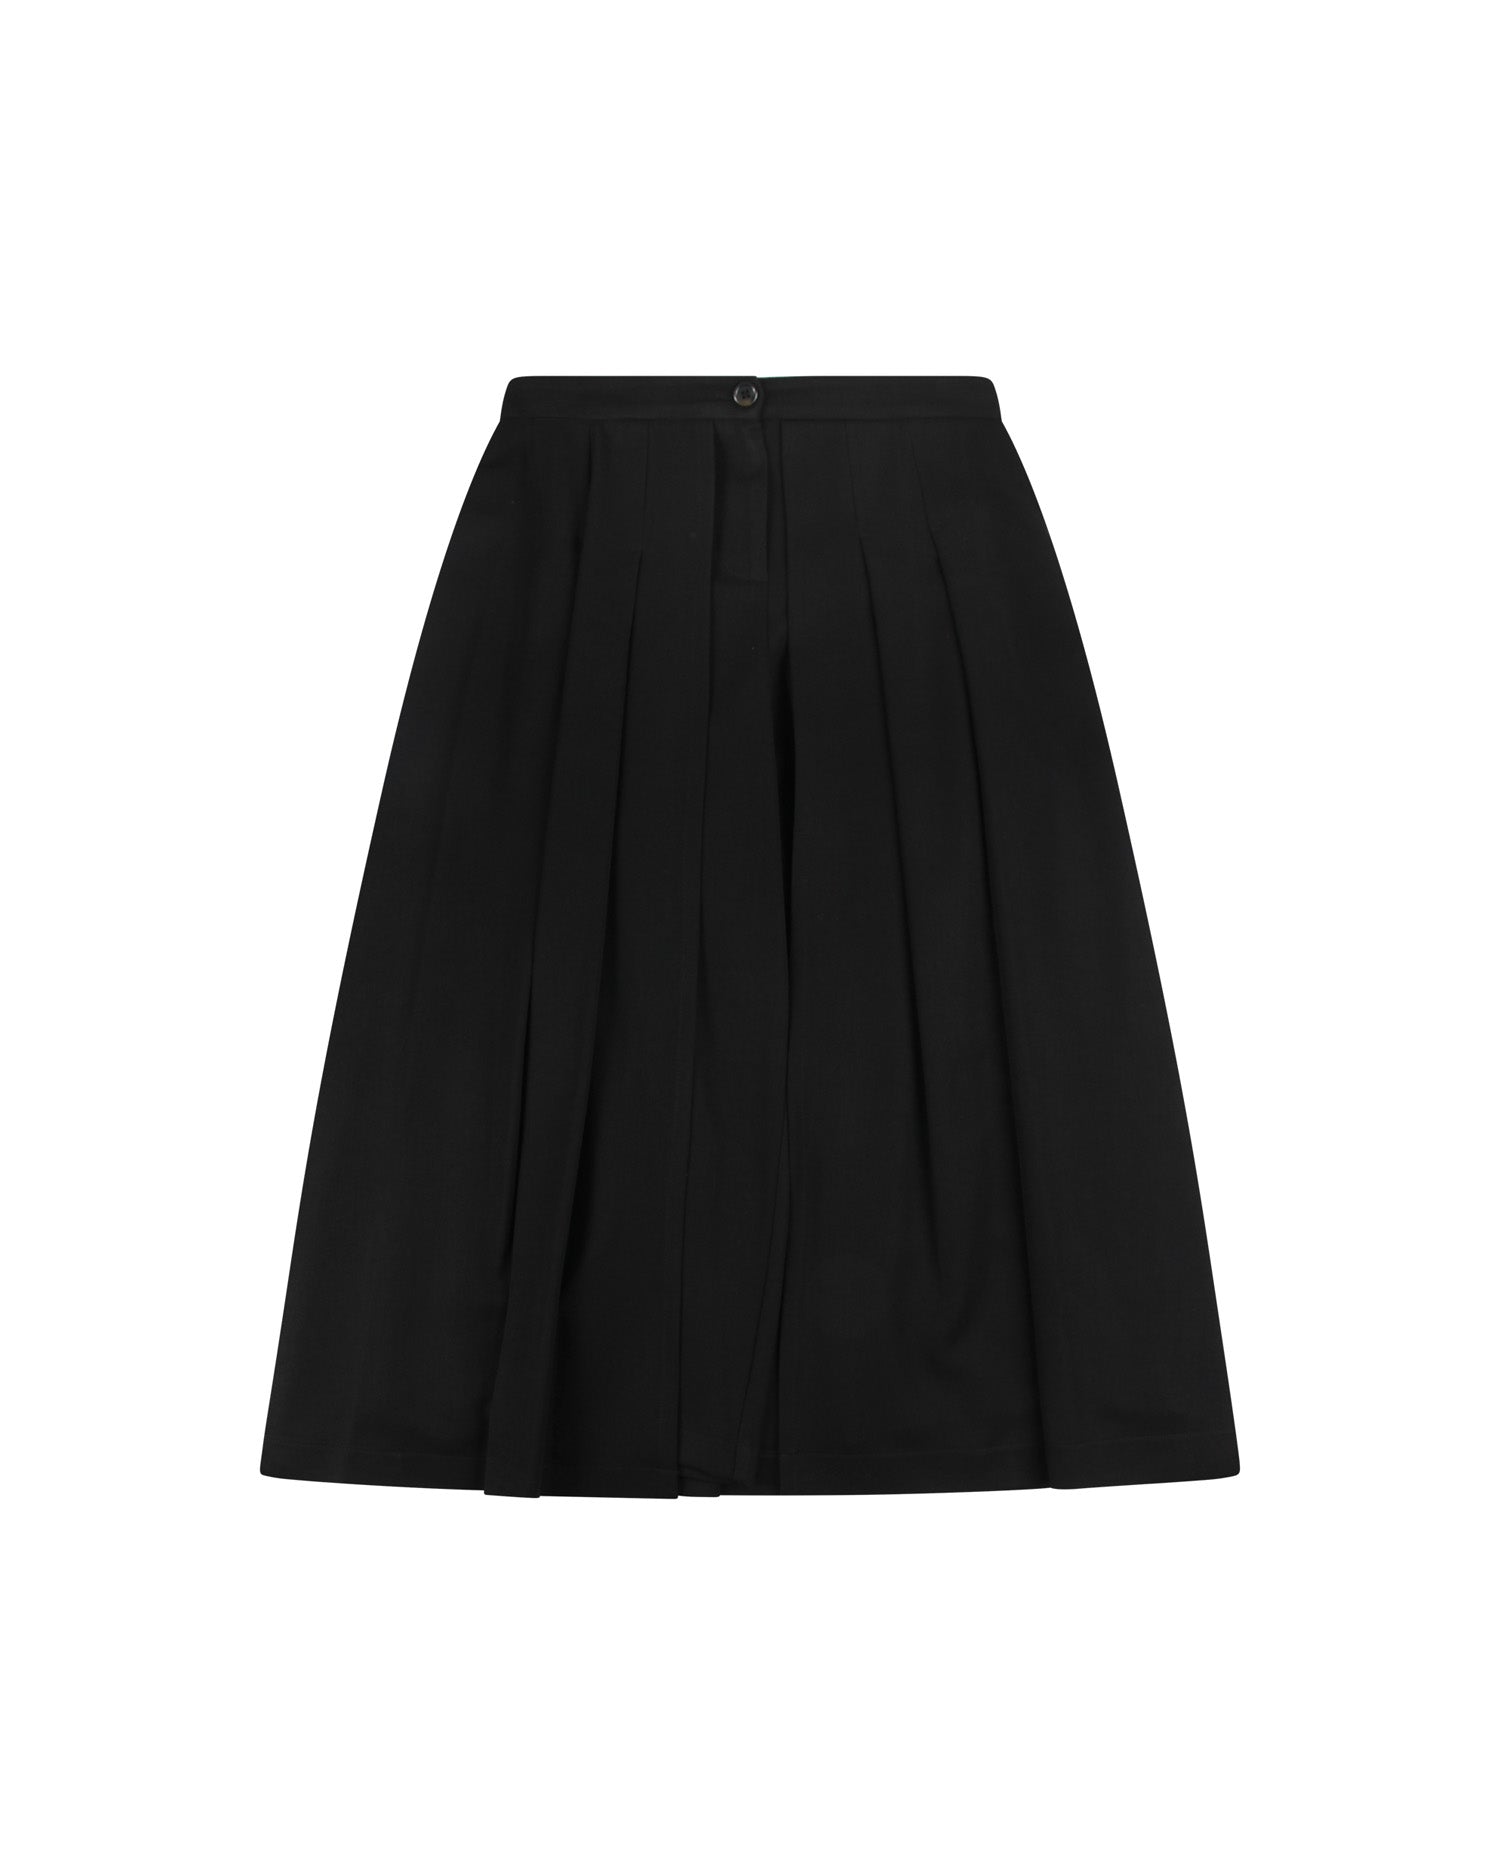 SKIRT EFFECT TROUSERS